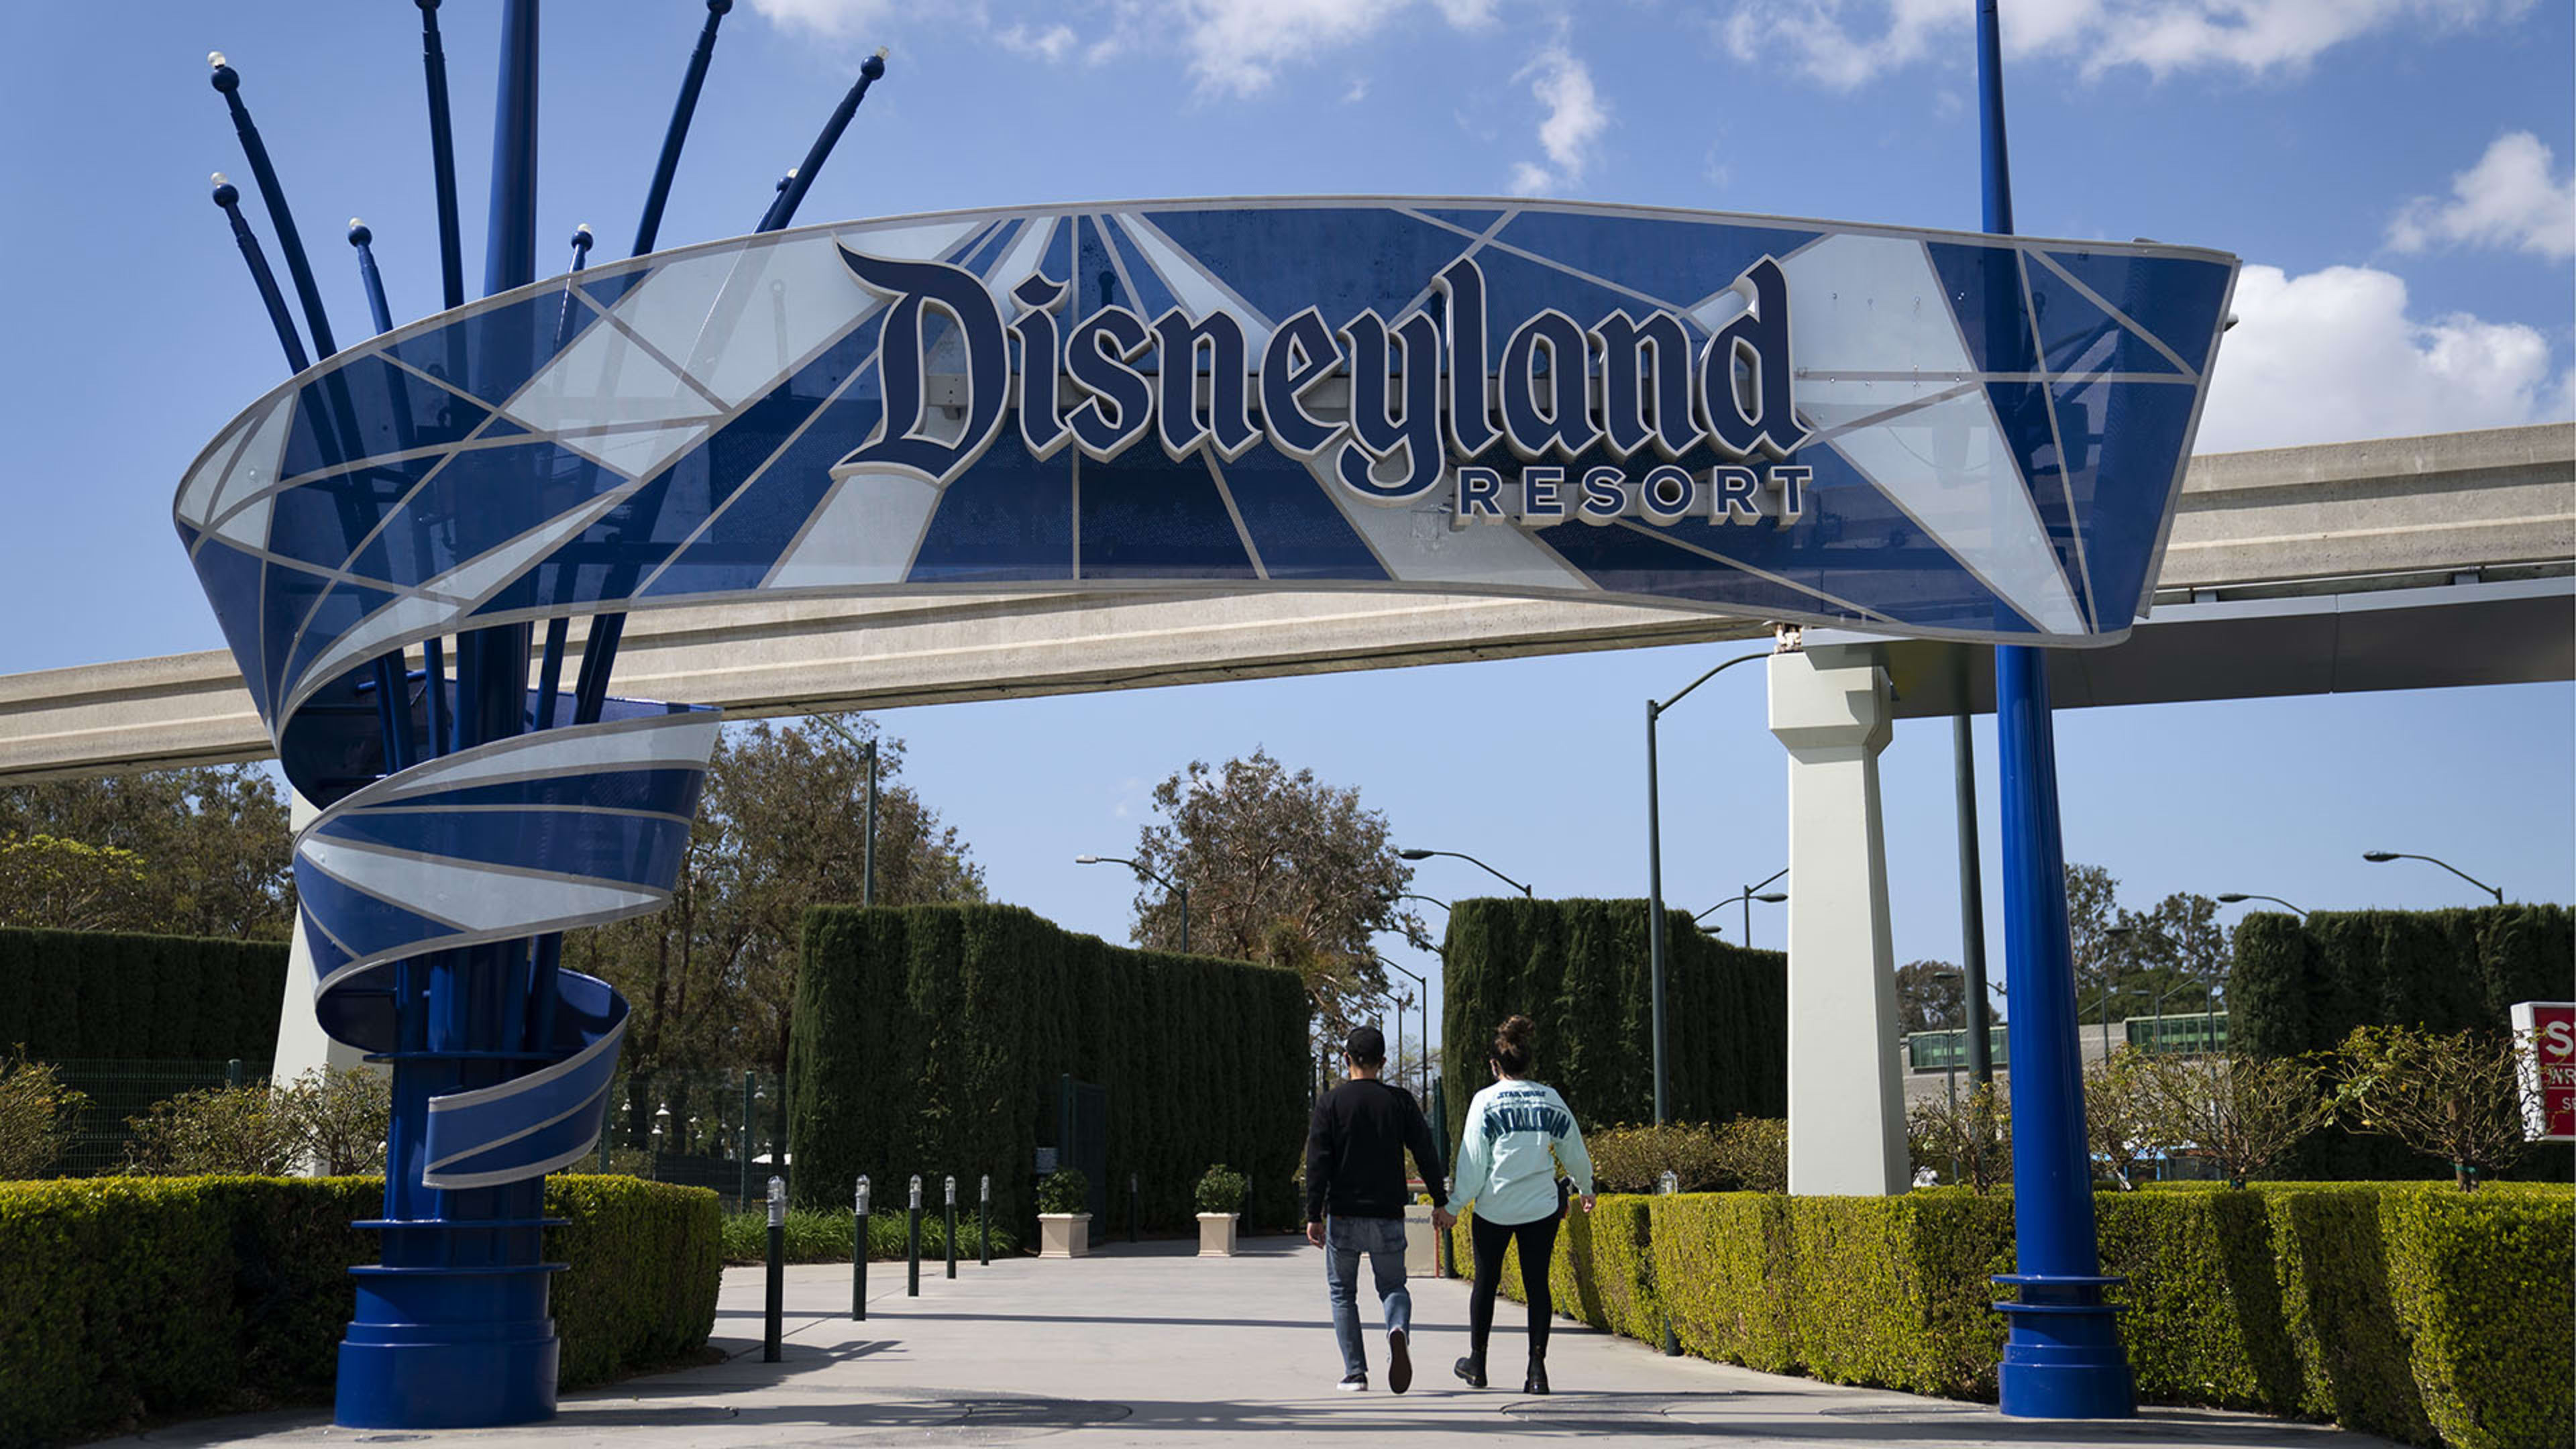 Immersing yourself in ‘Frozen’ or ‘Zootopia’ may soon be possible at Disneyland in California